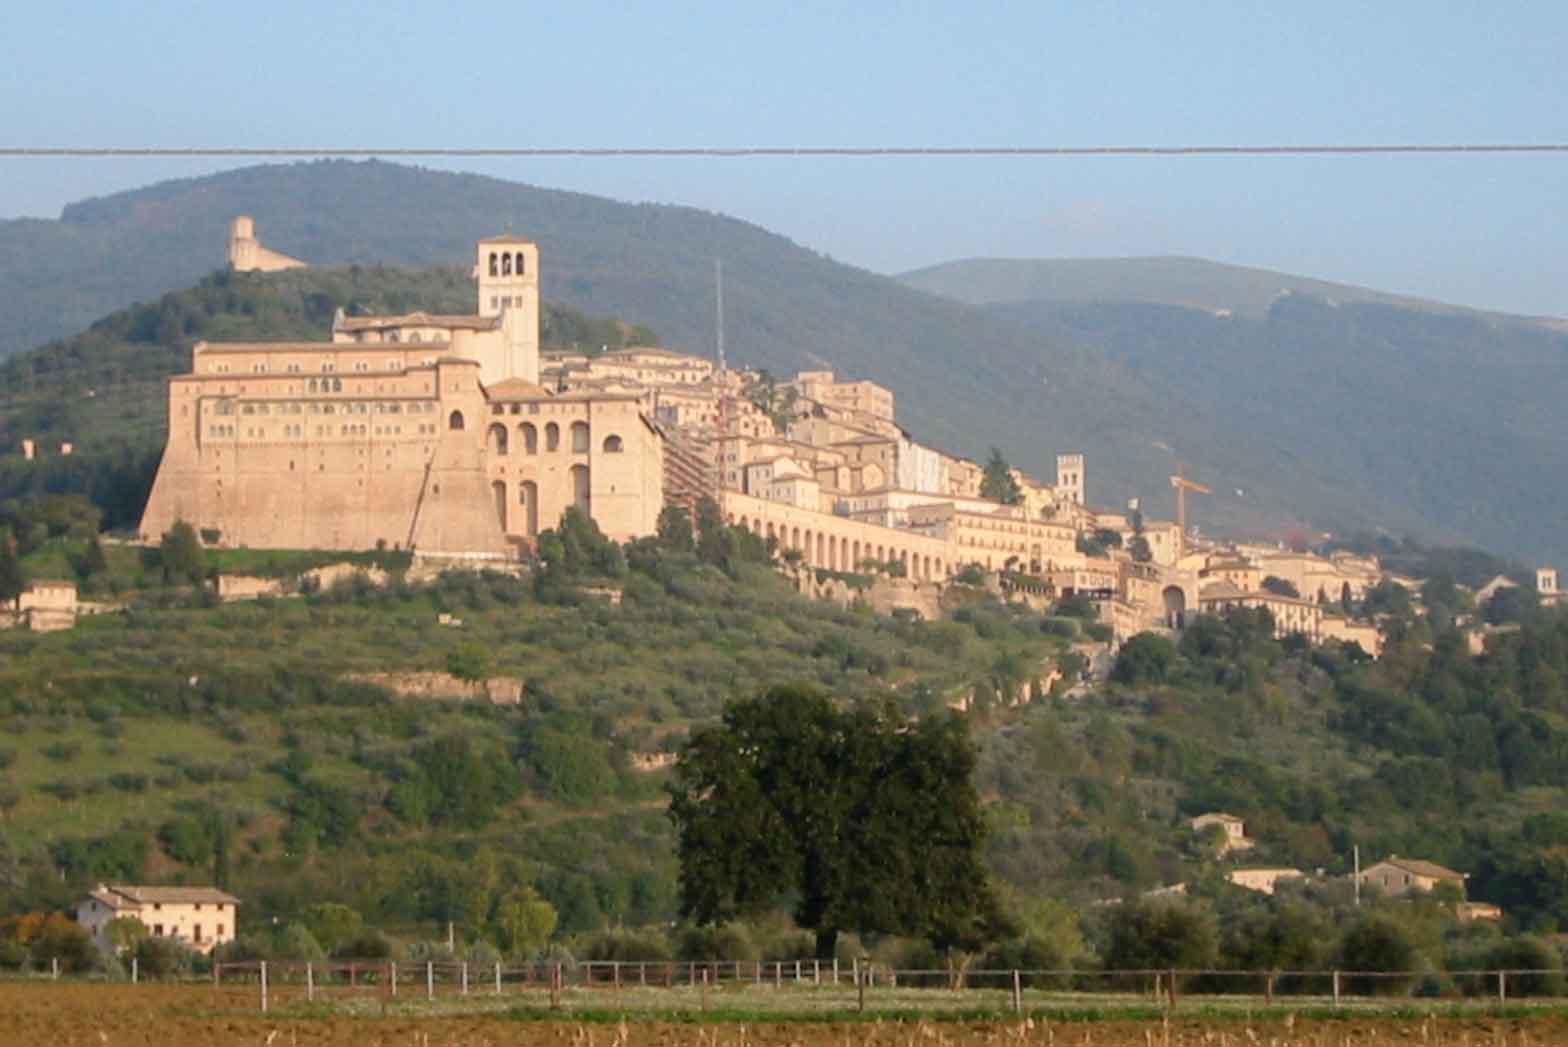 The city of Assisi